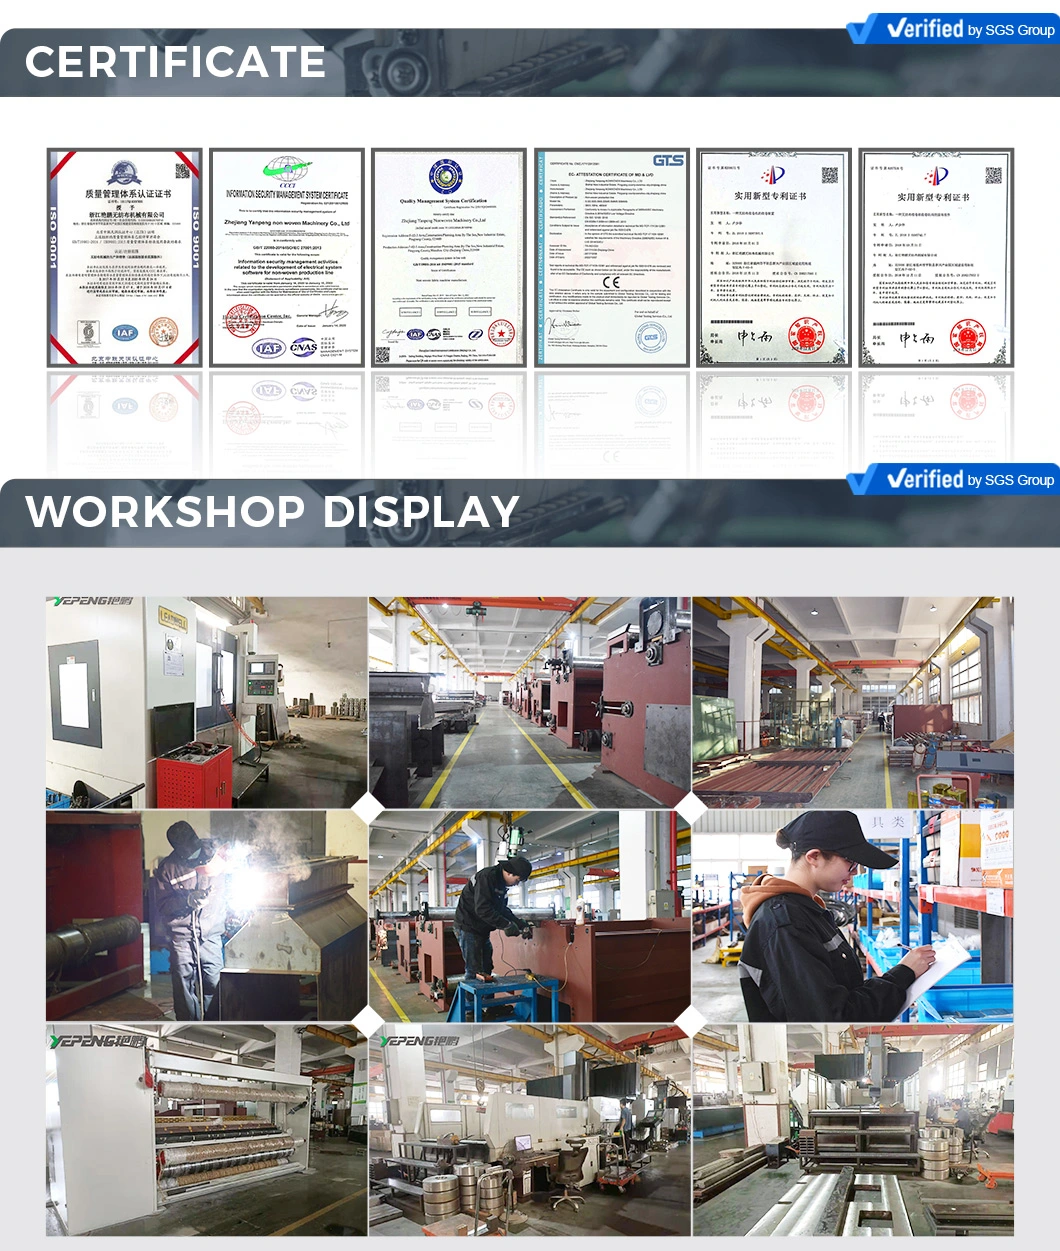 Yp-PP-Ssms/Ssmms Nonwoven Fabric Production Line PP Machine to Manufacture Fabric for Medical and Hygiene Articles